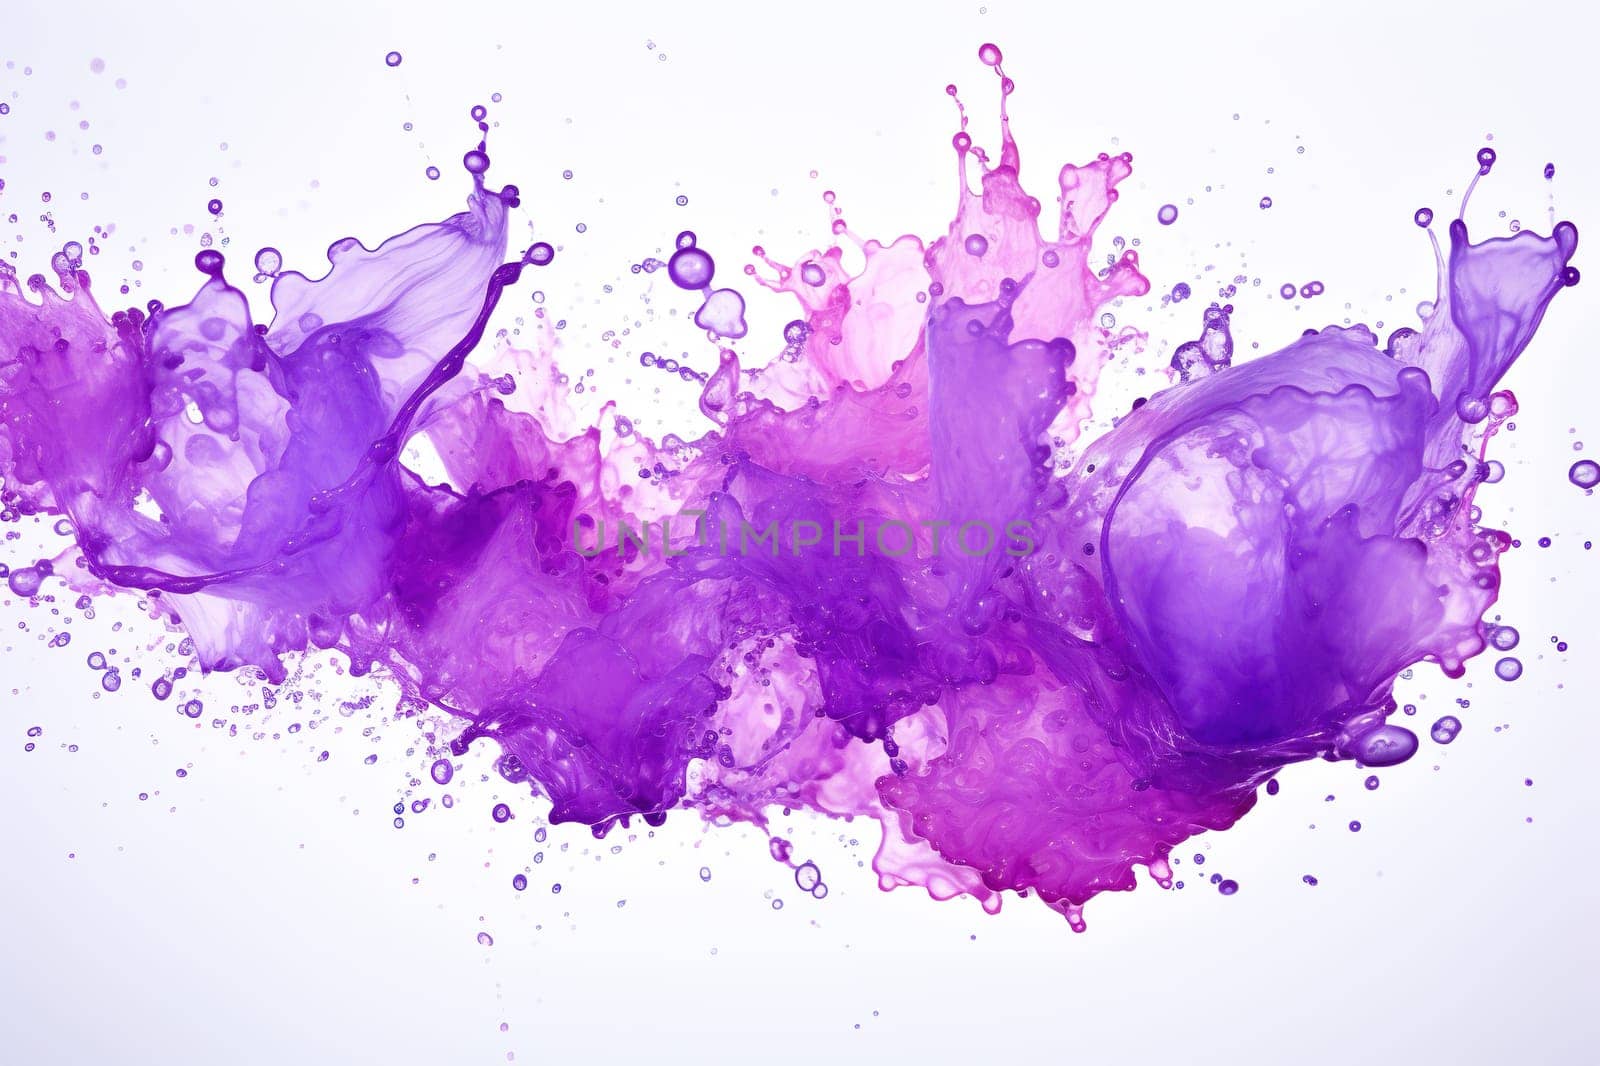 Splash of purple liquid. Splash of purple color on a white background. Abstract color background.